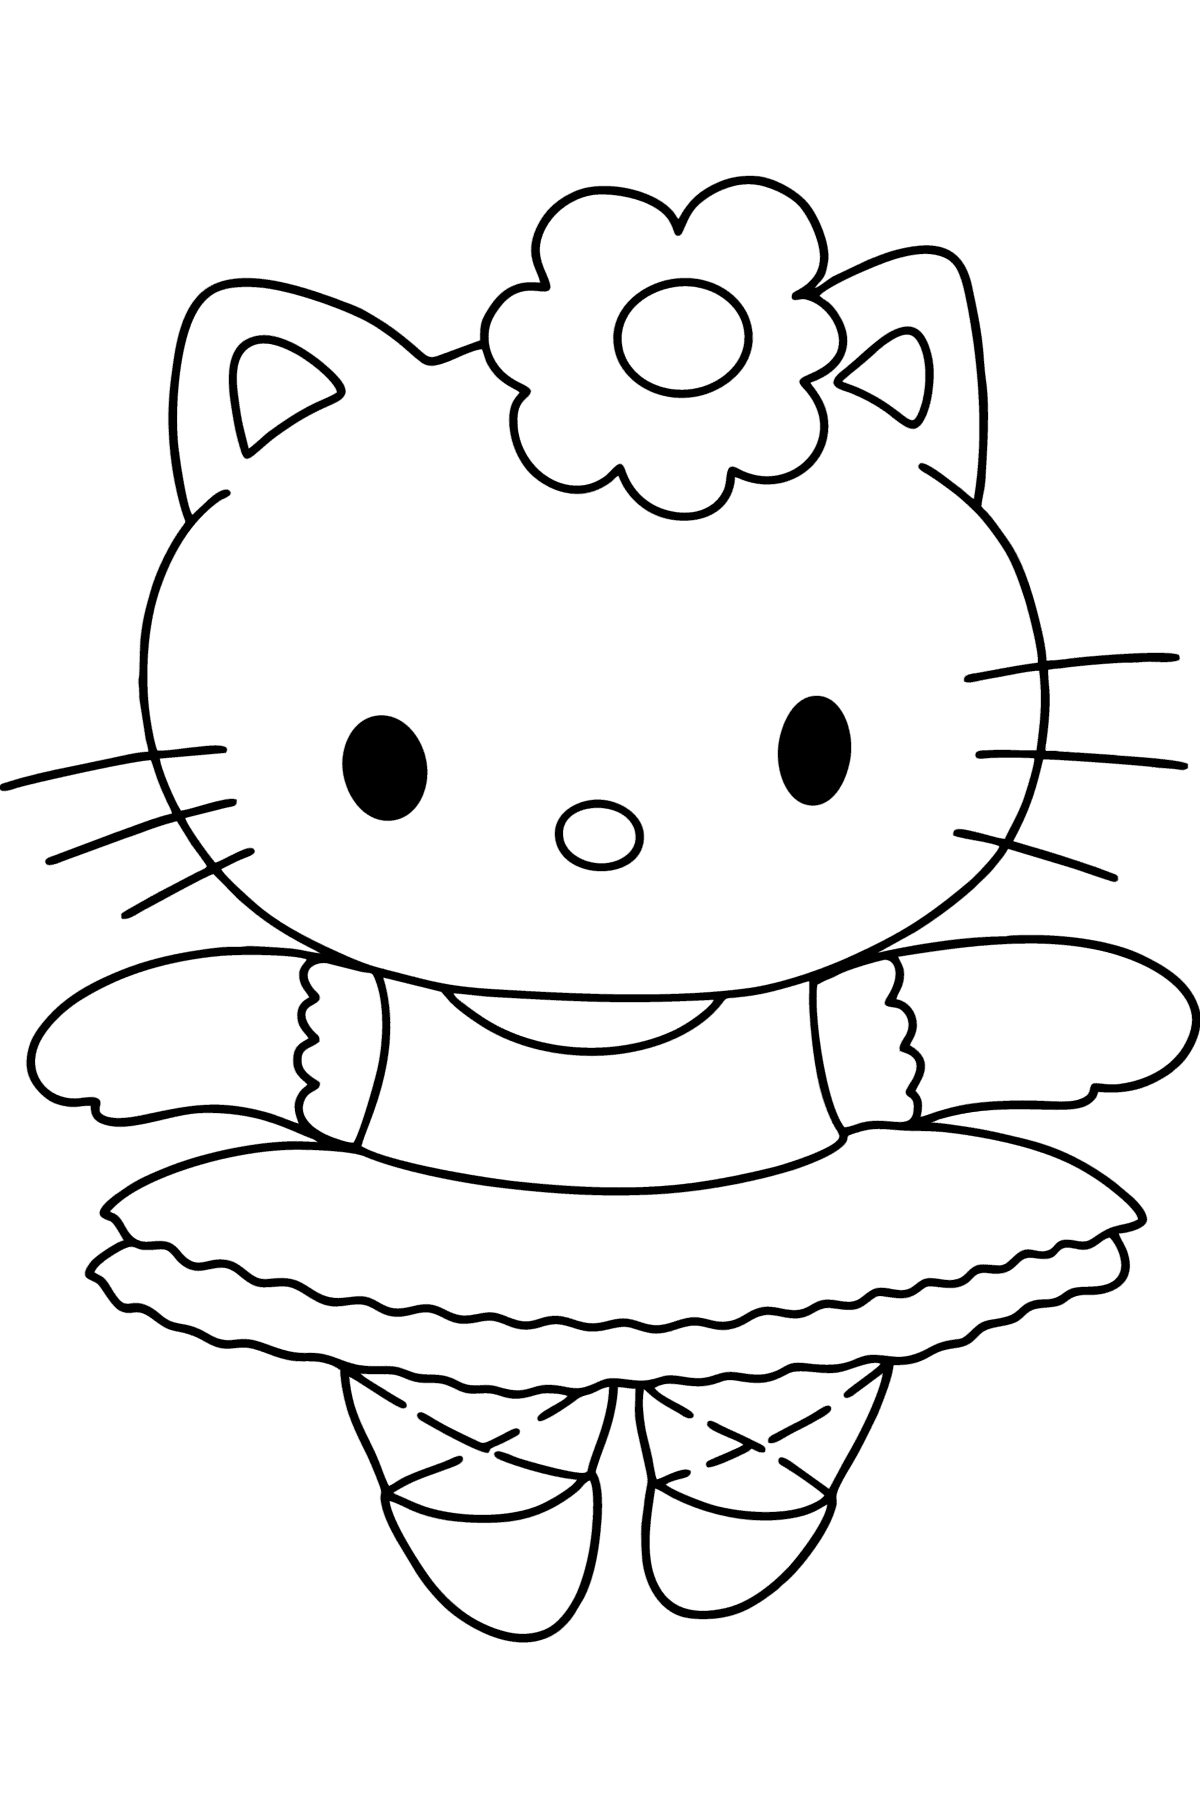 Hello Kitty Ballerina coloring page - Coloring Pages for Kids